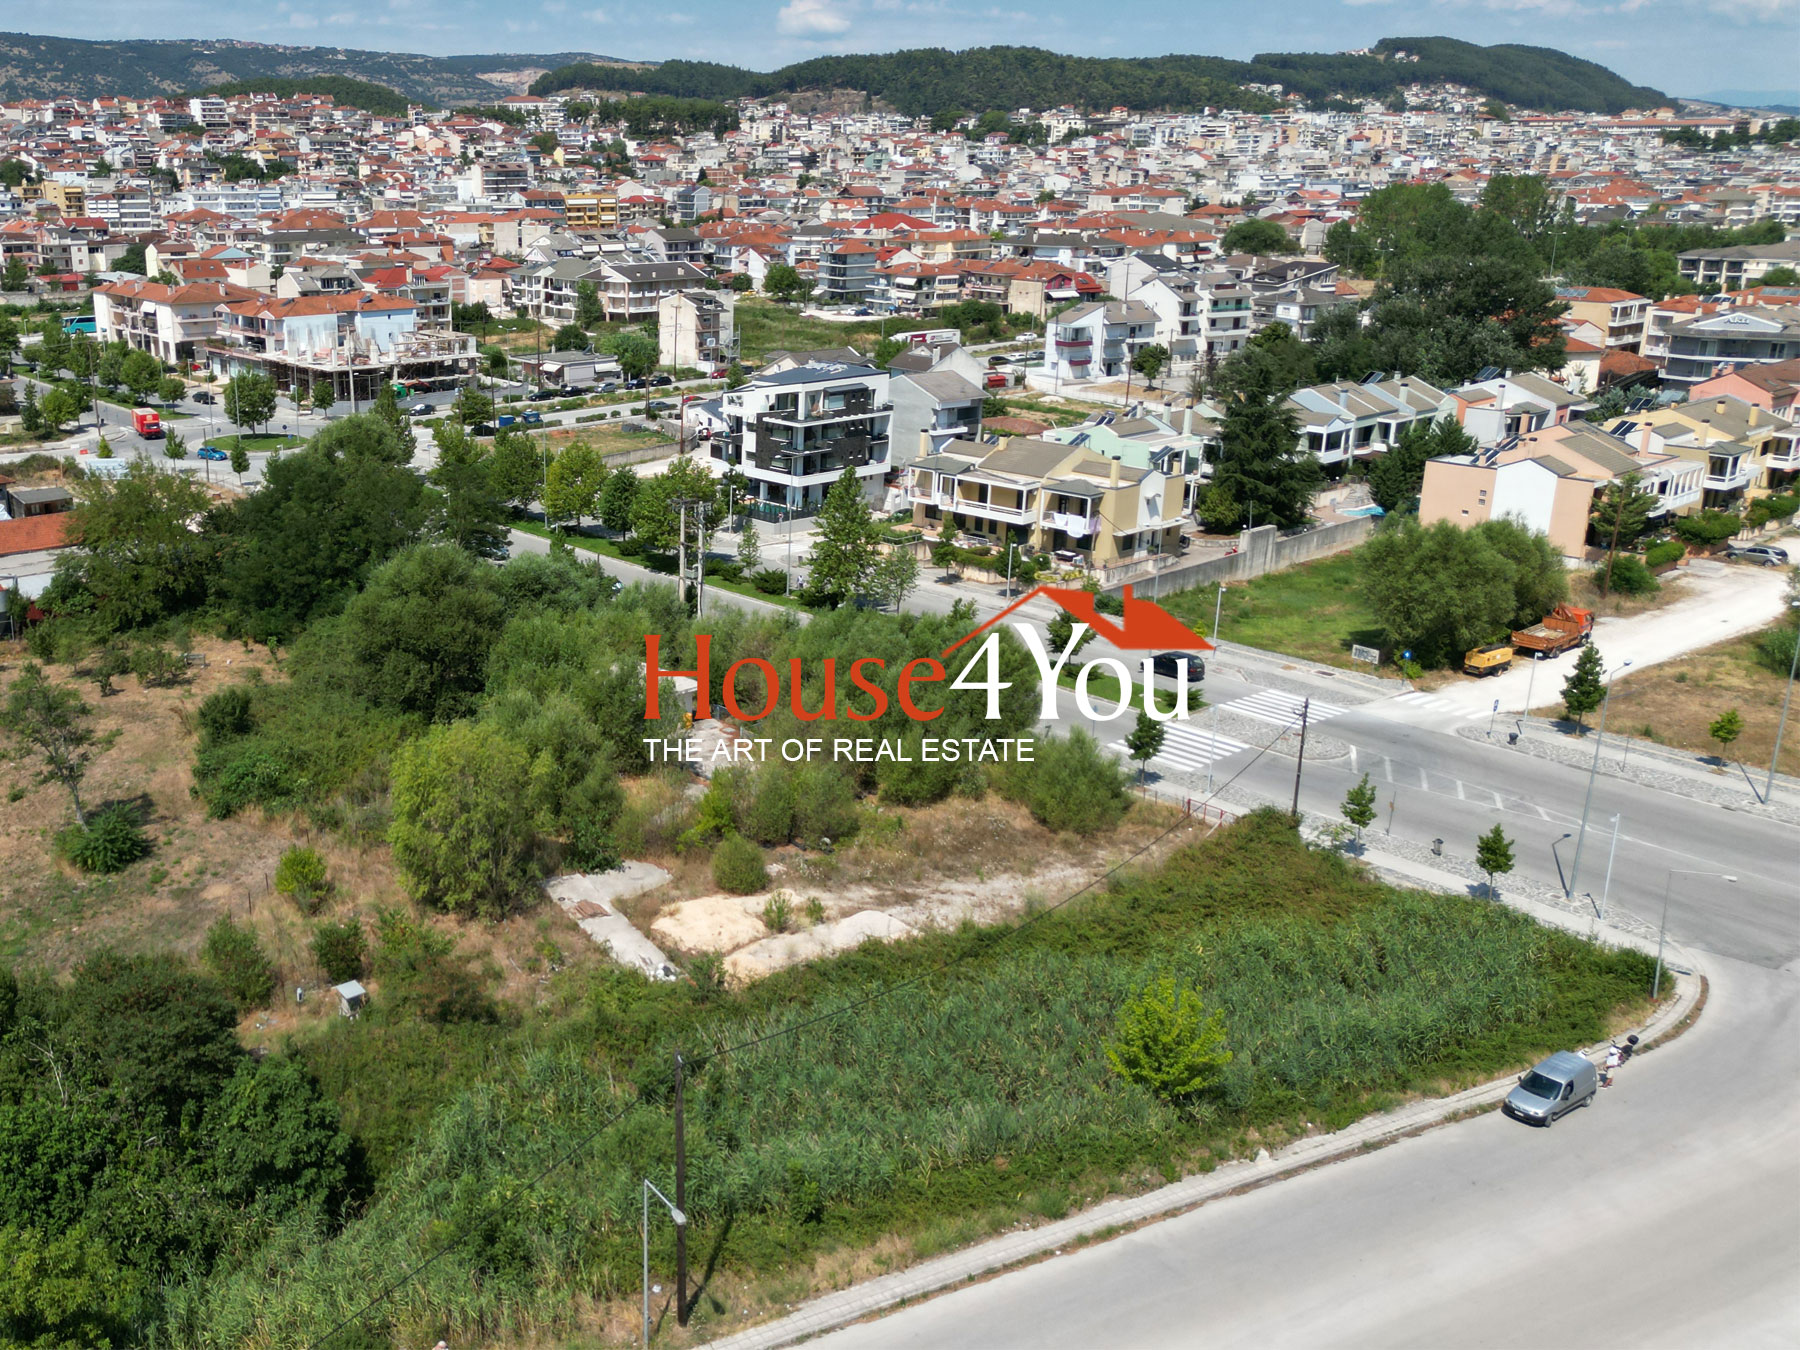 For sale are 4 neighboring parcels of land with a total area of 61,714 sq.m. in the area of Botanikos next to Lake Ioannina